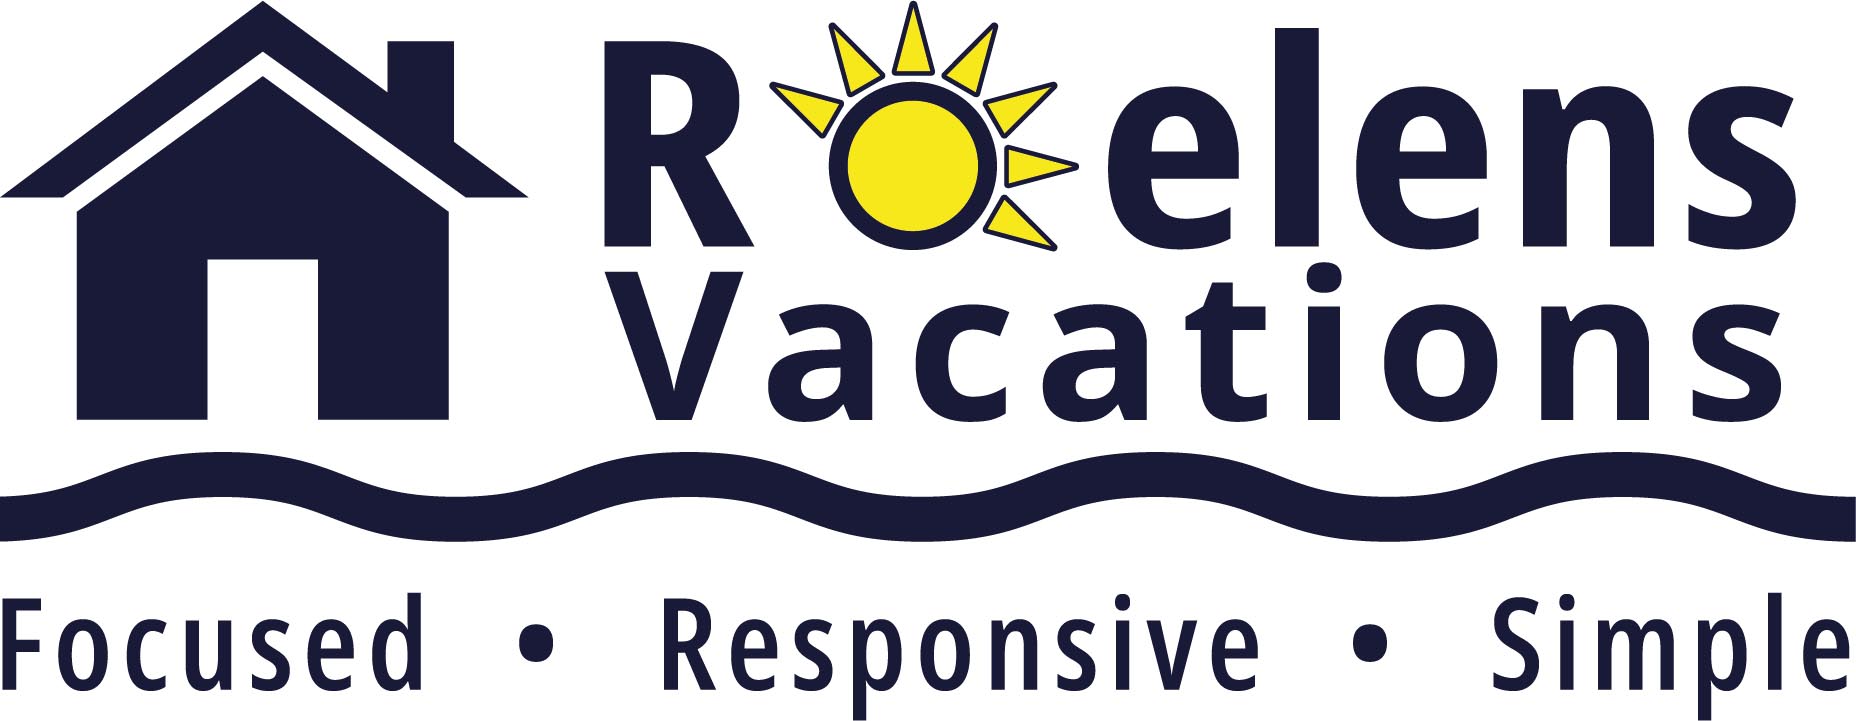 Roelens Vacations - The Finest Vacation Rental Property Management Company for the Cape Coral and Fort Myers Area of Florida!